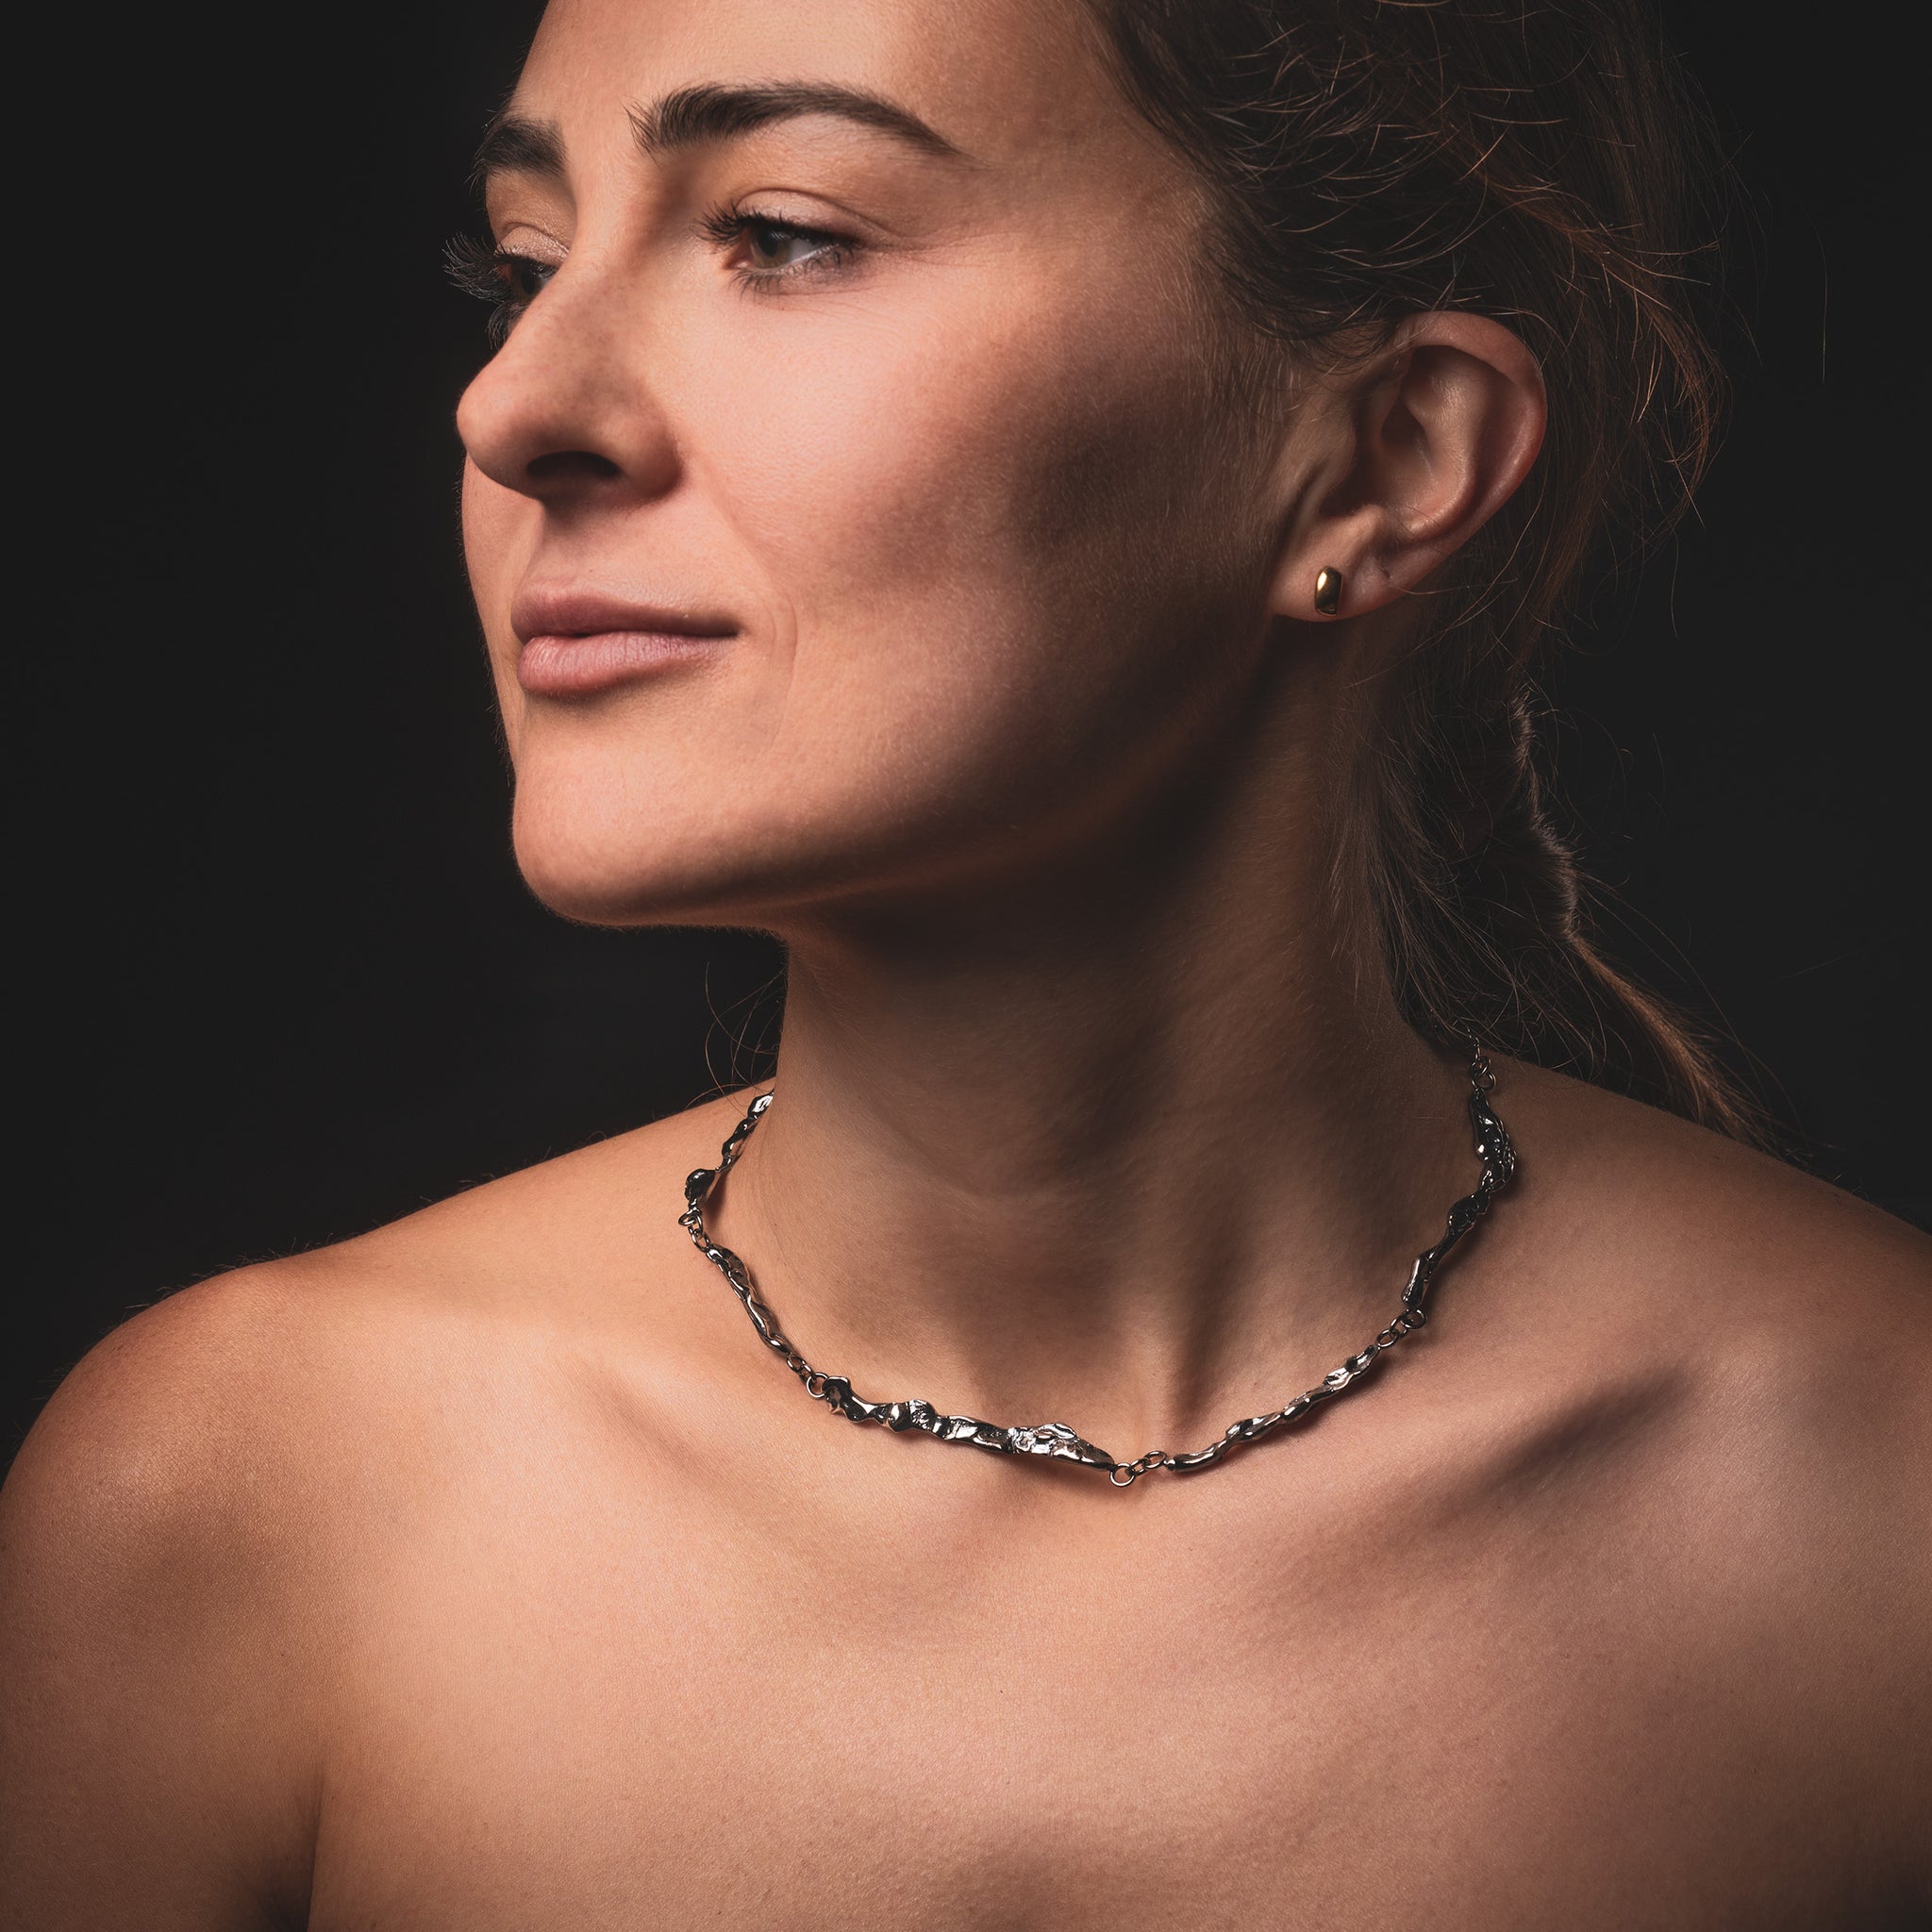 Young Woman Wearing Handmade Silver Necklace Choker 